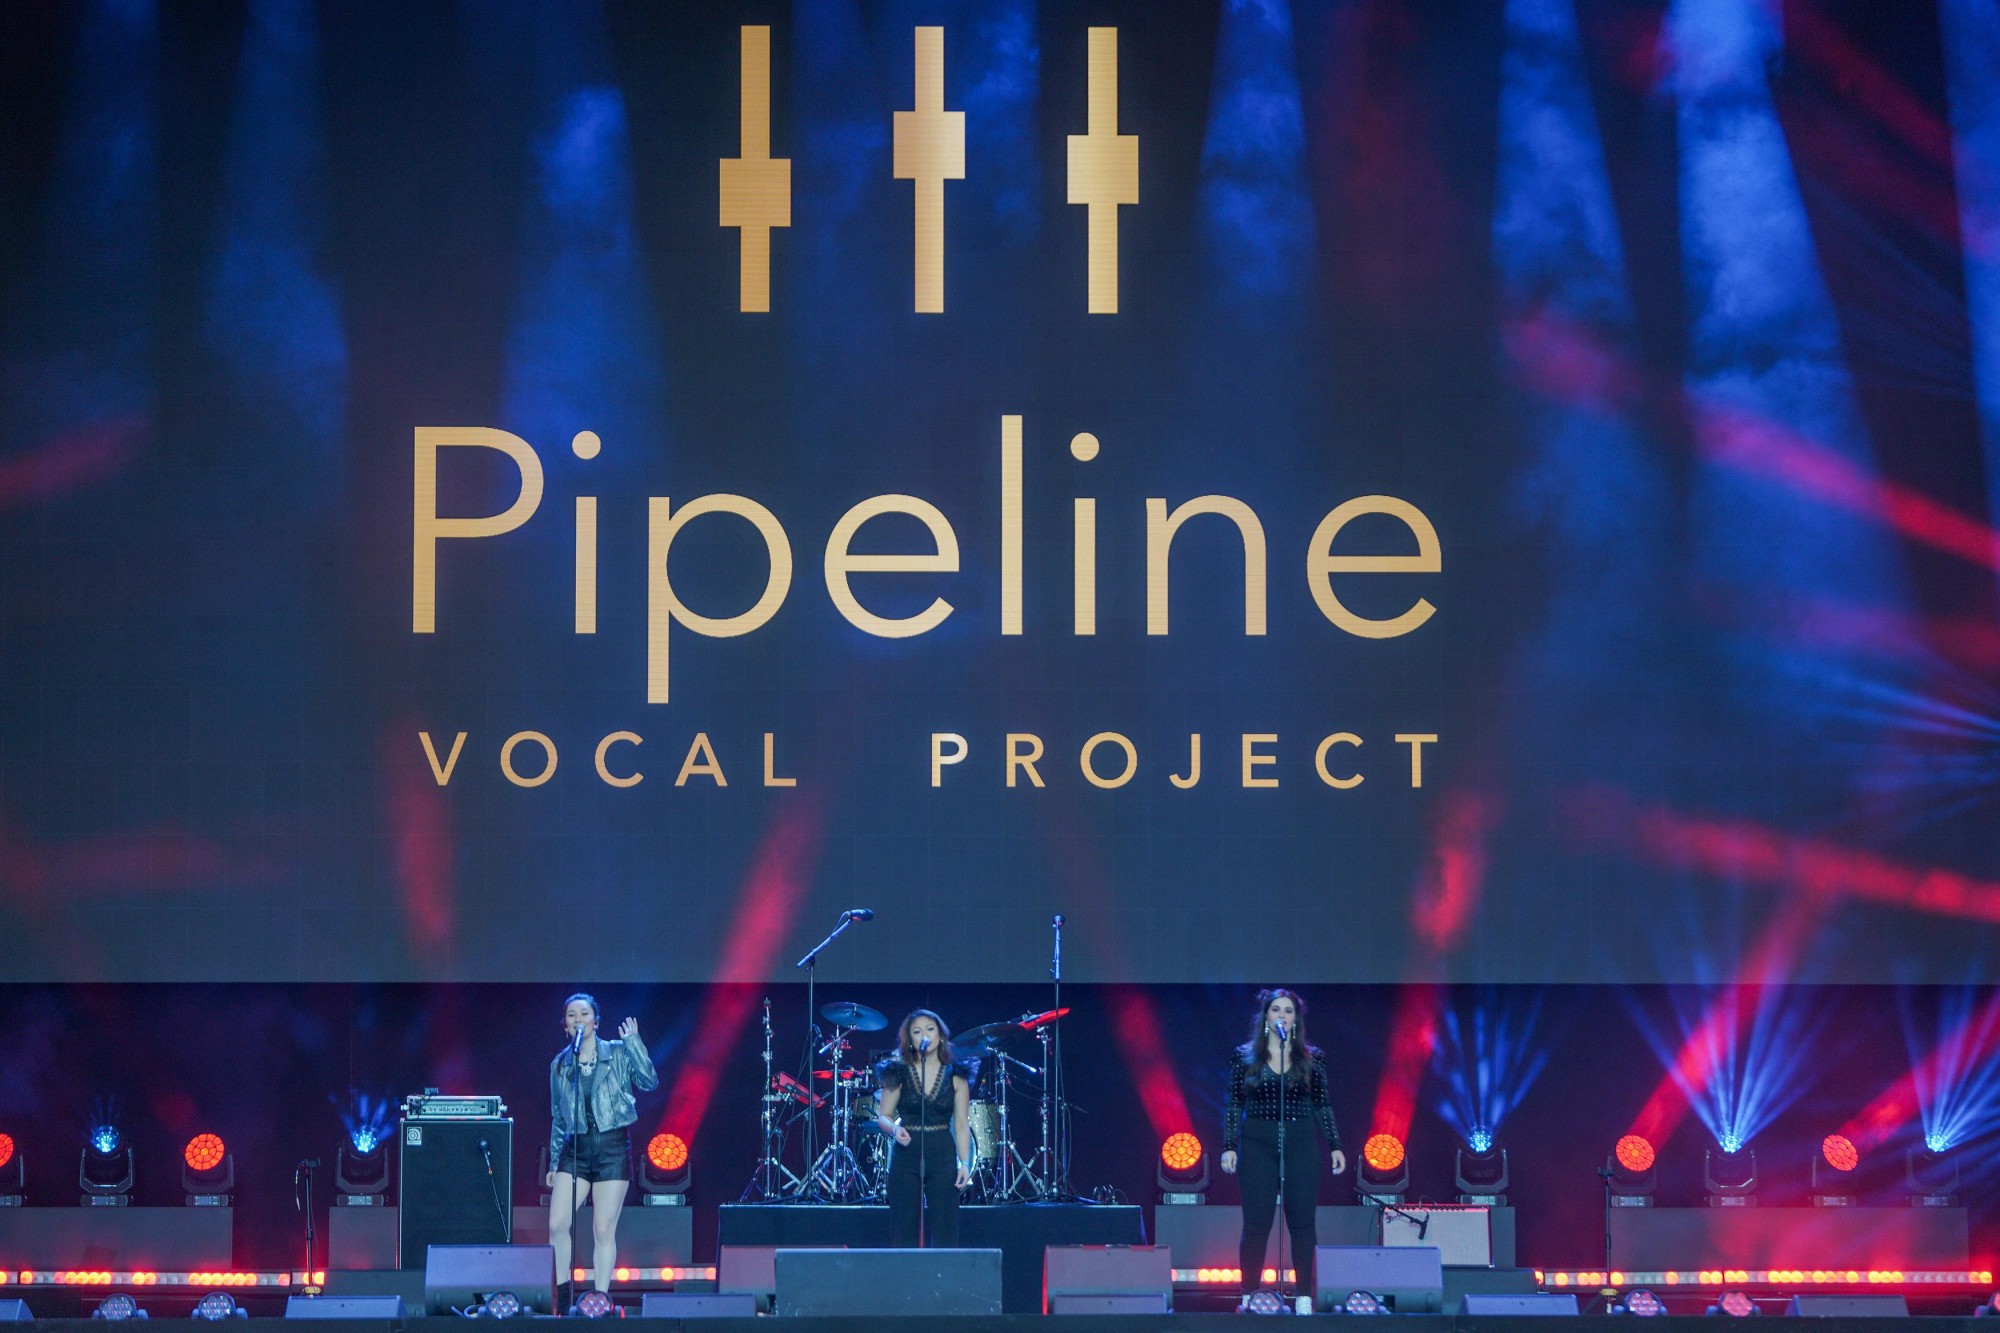 Pipeline Vocal Project perform at Jubilee Stage m59437